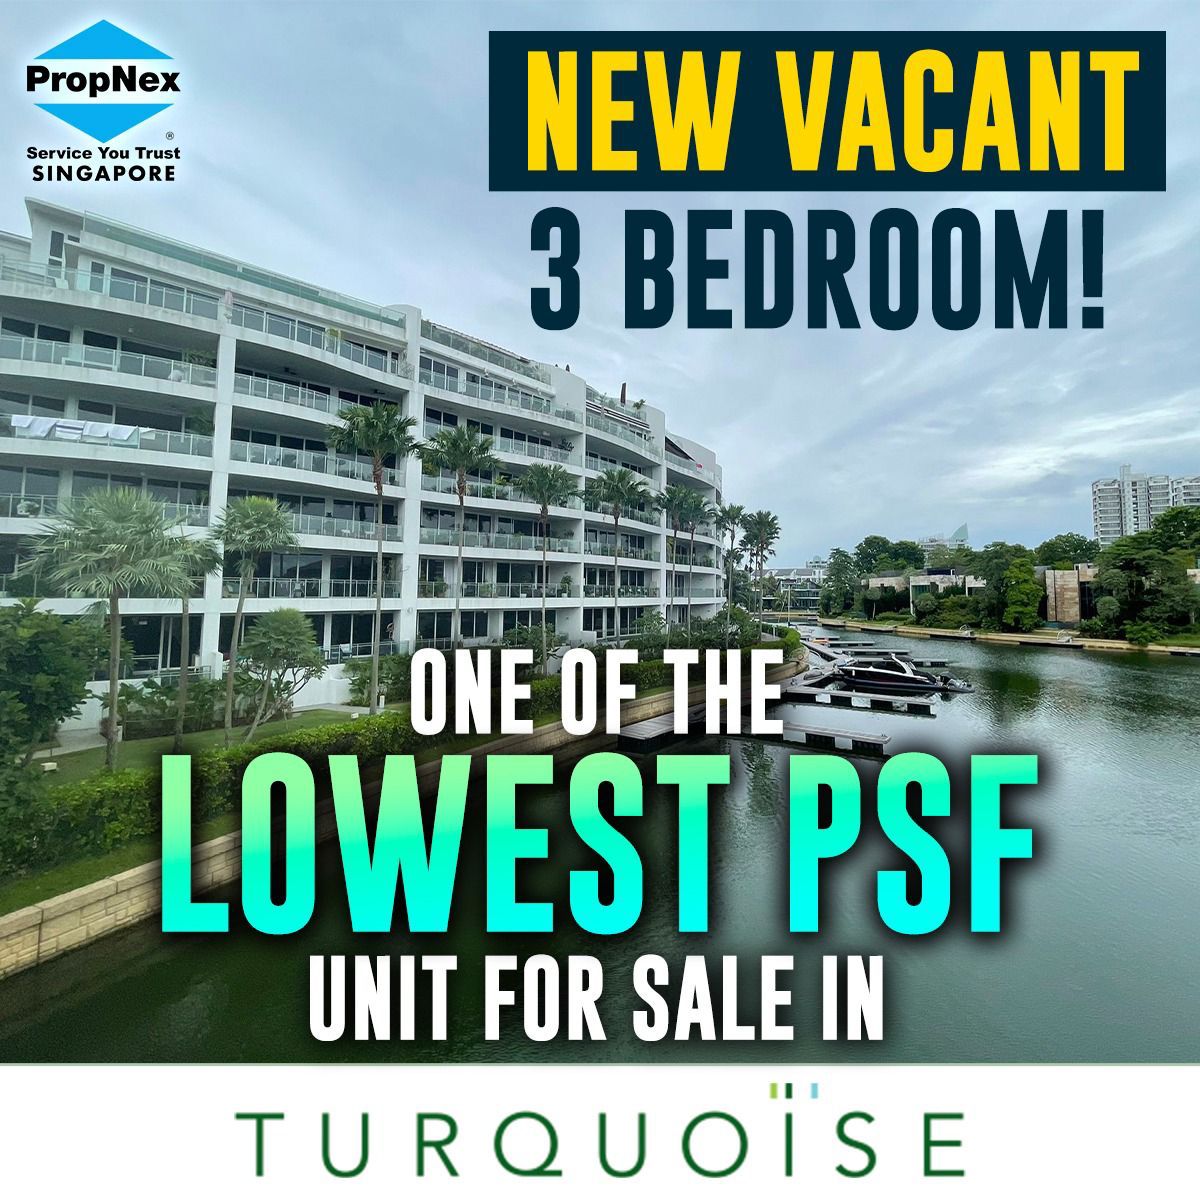 Turquoise lowest PSF